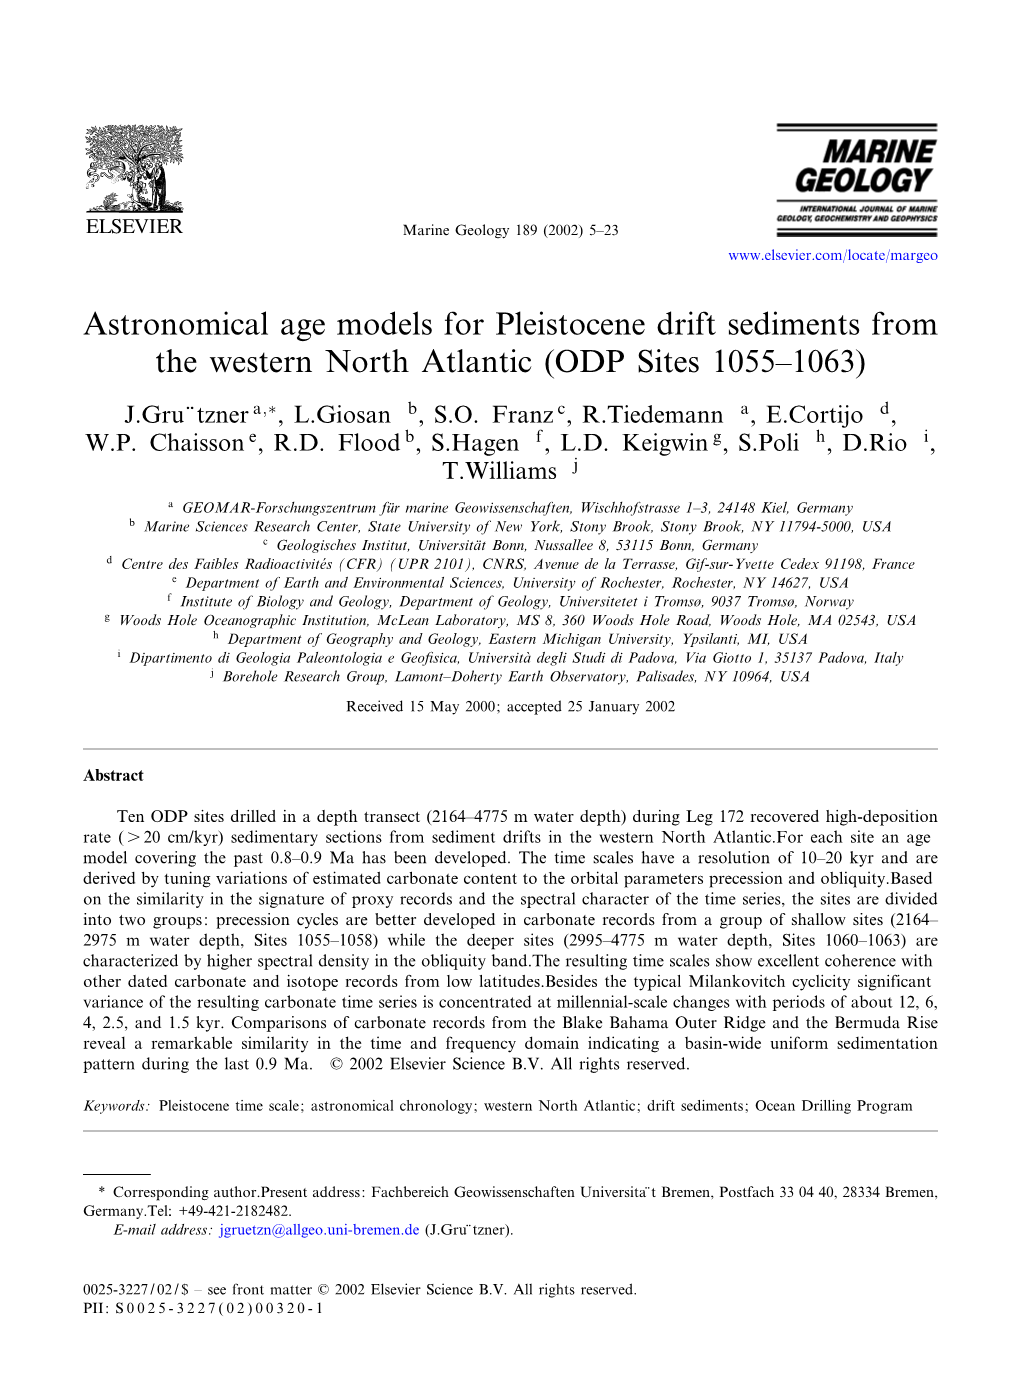 Astronomical Age Models for Pleistocene Drift Sediments from the Western North Atlantic (ODP Sites 1055^1063)